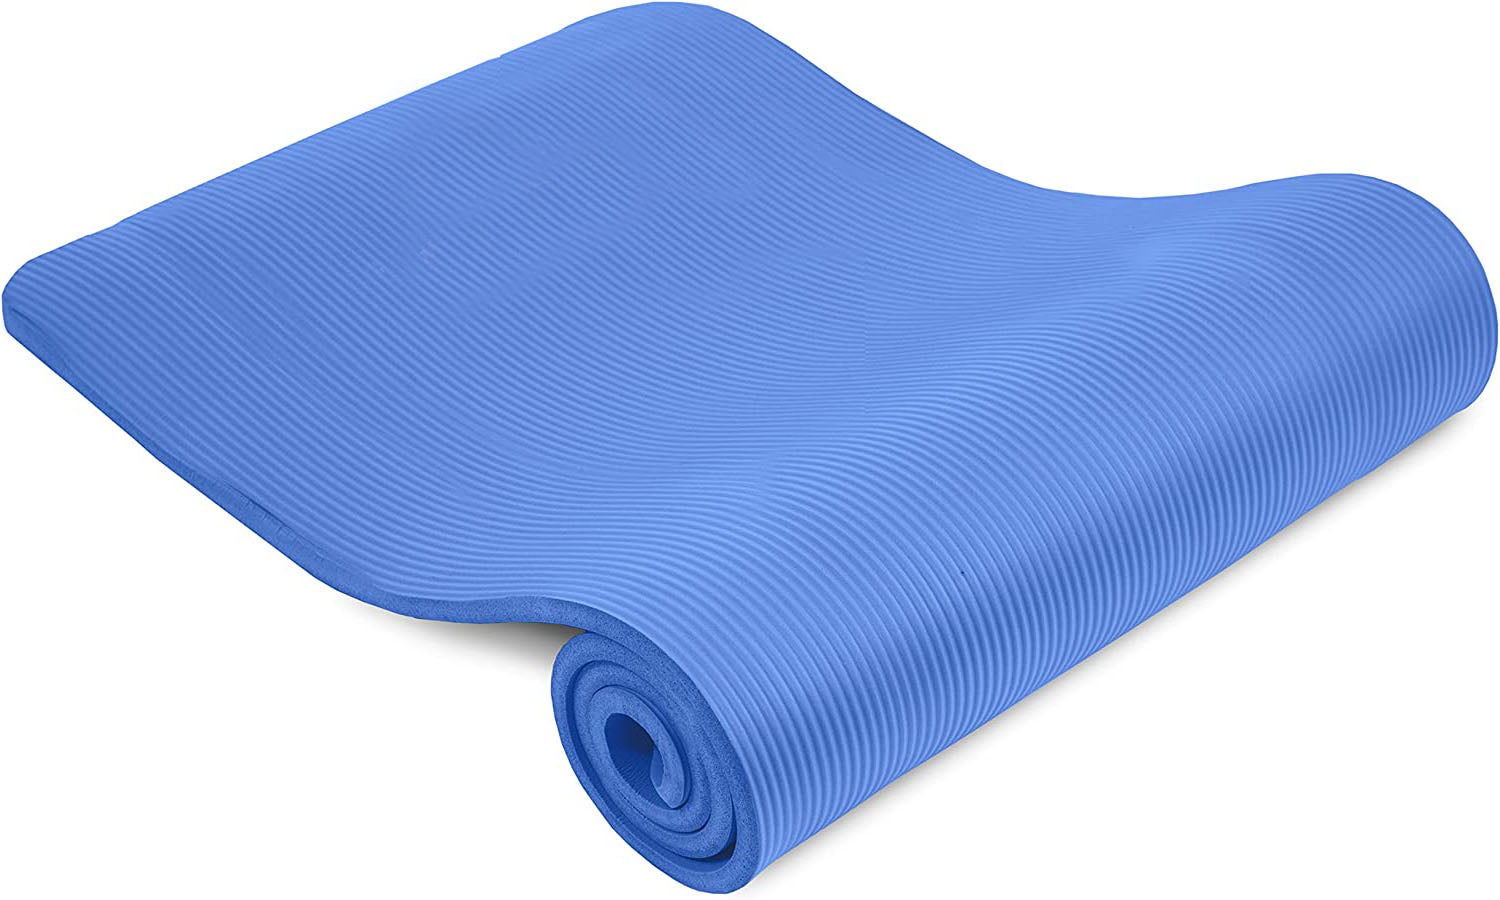 Stunner 15mm Yoga Mat, NBR Material with Carrying Strap, 15mm Extra Thick  Exercise Yoga Mats for Workout Yoga Mat Yoga | Fitness | Anti Slip Yoga Mats